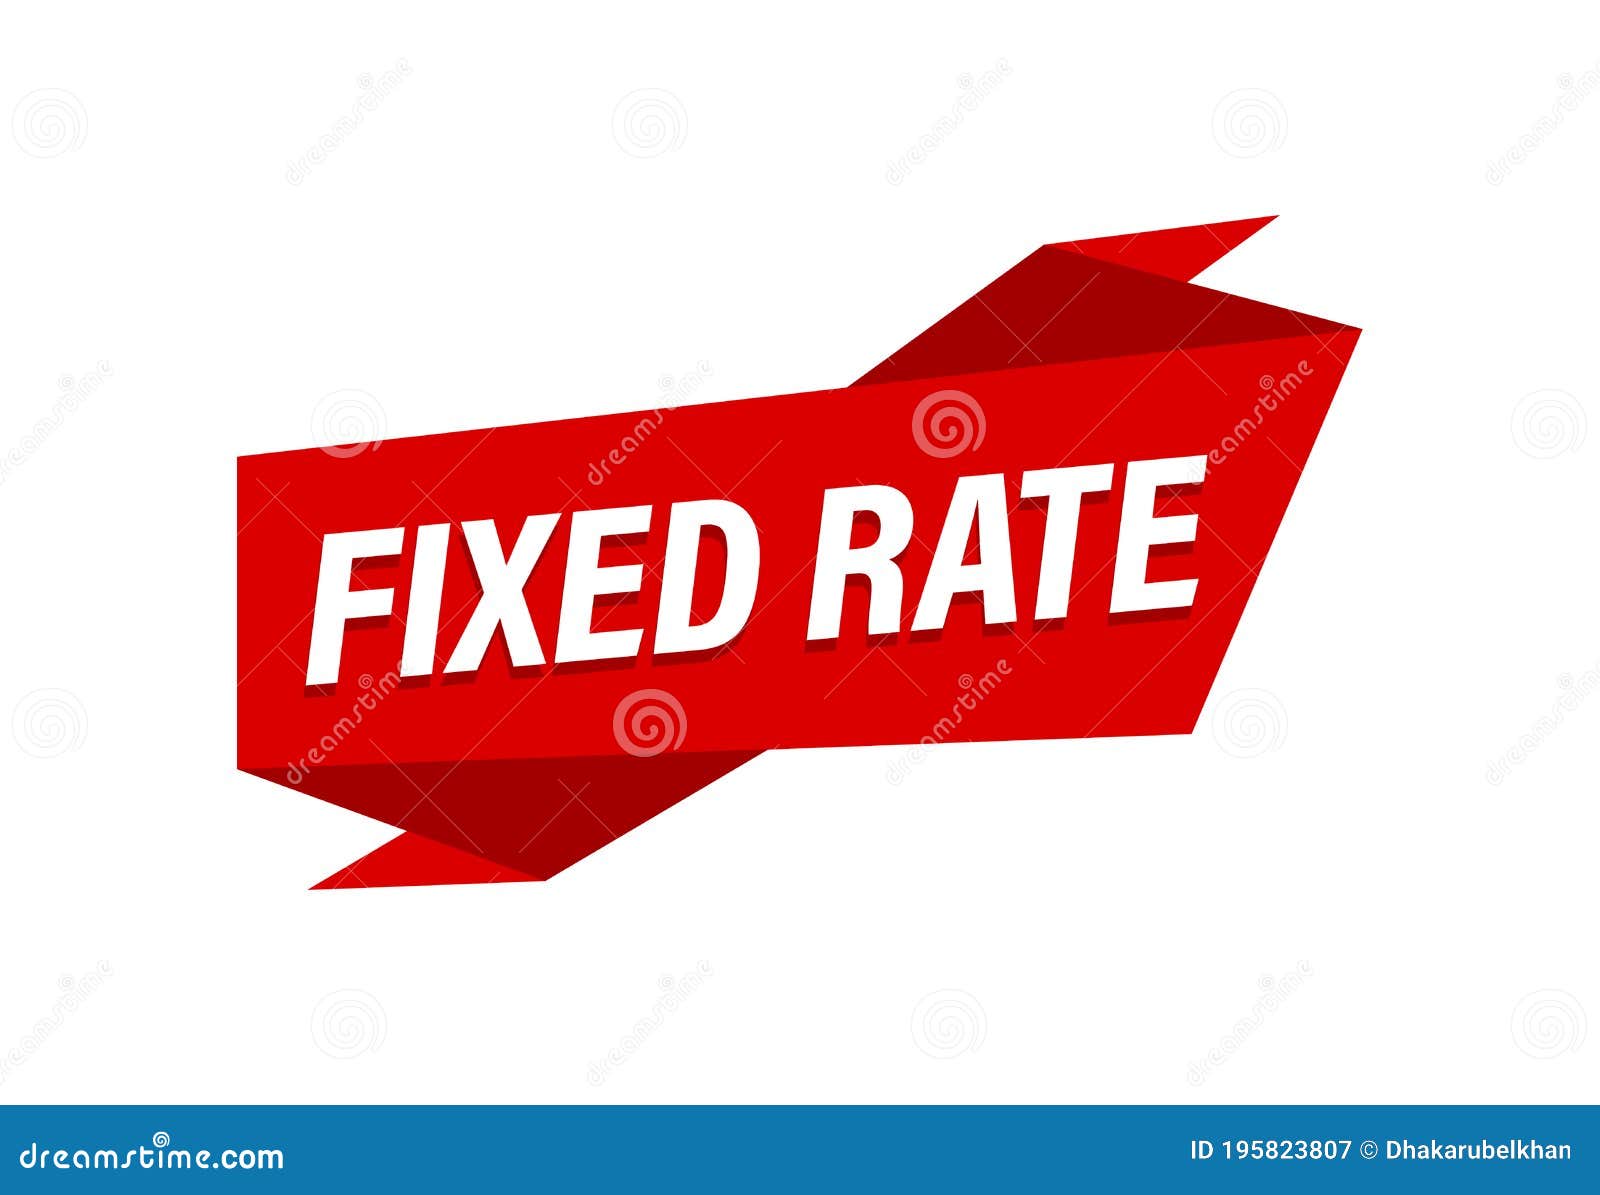 fixed-rate-written-red-flat-banner-fixed-rate-stock-vector